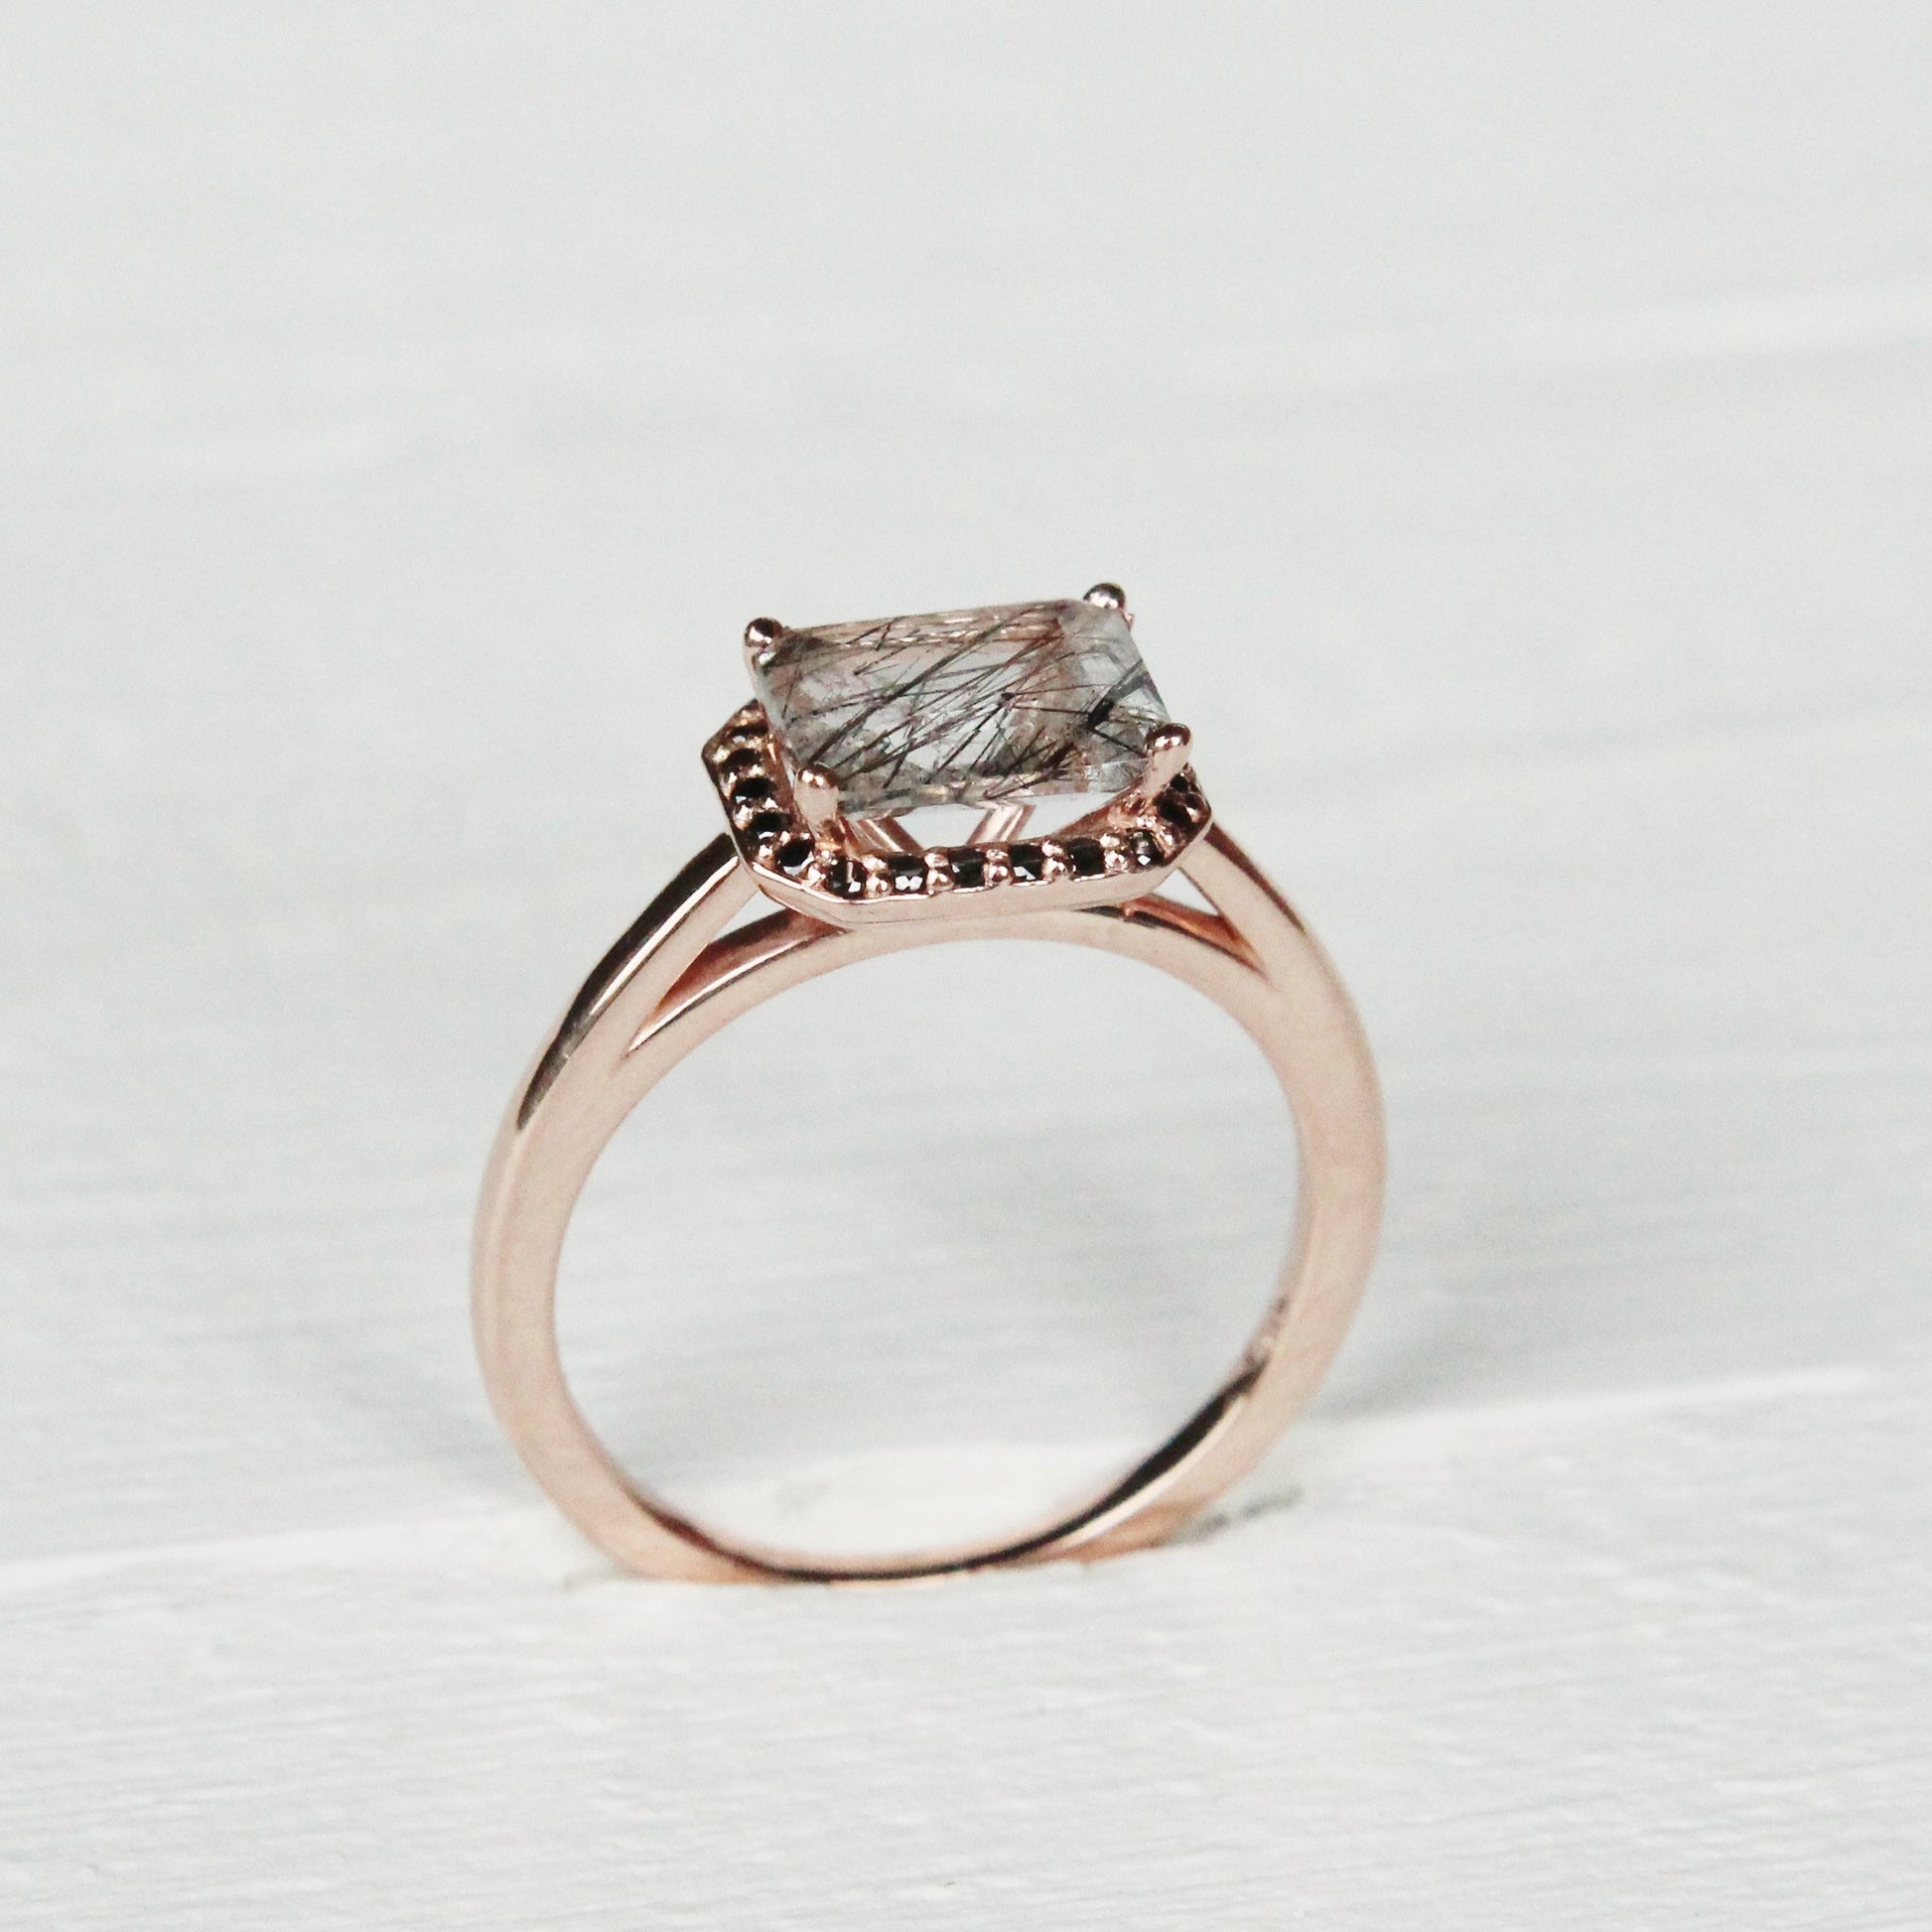 Kait - Emerald Cut Tourmalinated Quartz in a Diamond Halo - Pick your diamonds and metal - Midwinter Co. Alternative Bridal Rings and Modern Fine Jewelry